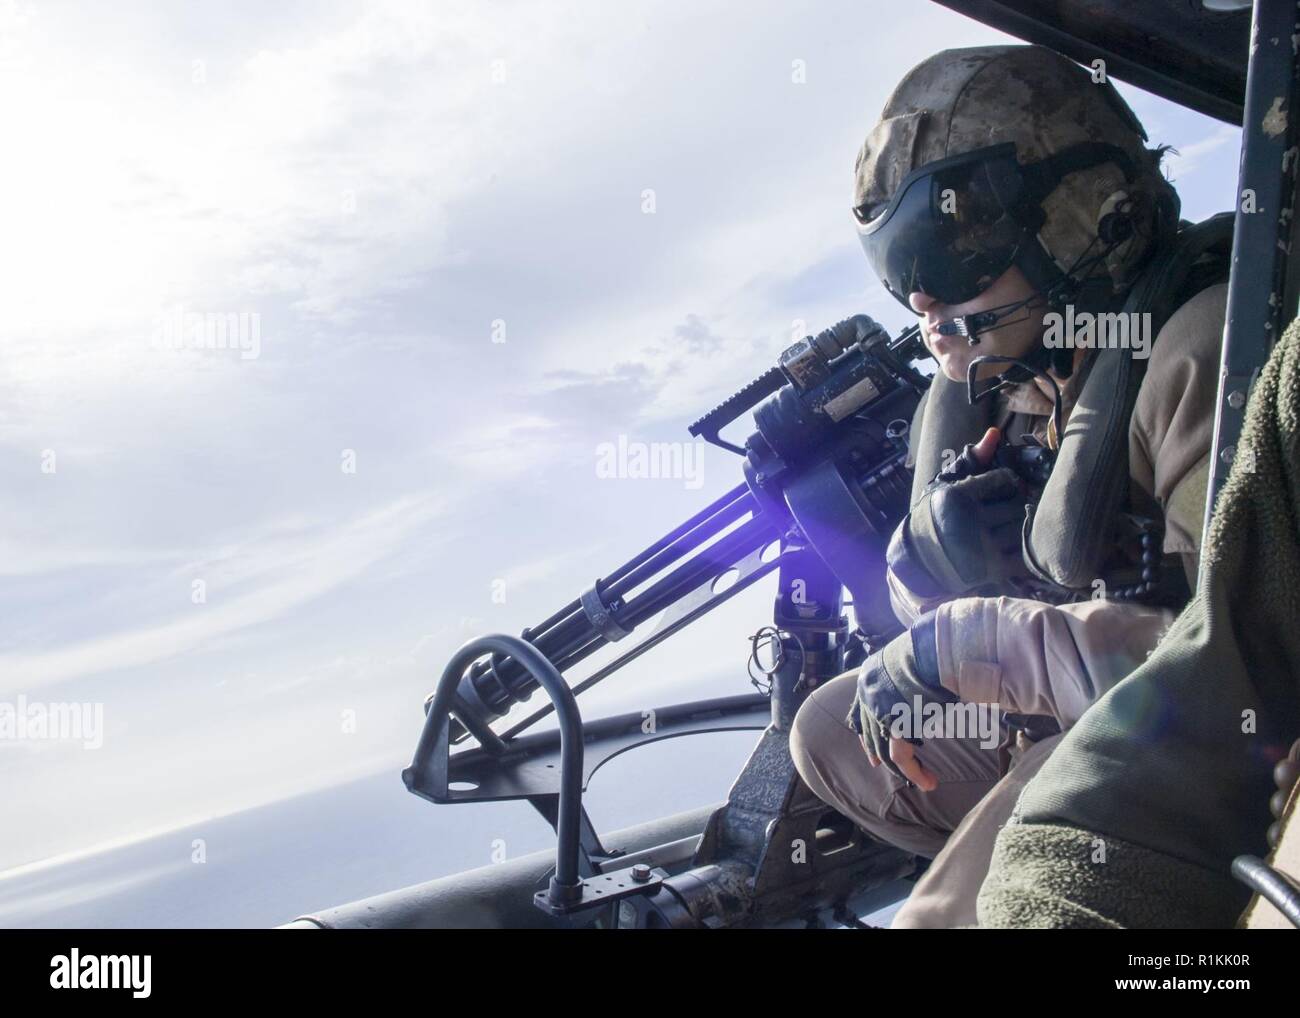 MEDITERRANEAN SEA (Oct. 15, 2018) U.S. Marines Cpl. Daniel Rios, assigned to Marine Medium Tiltrotor Squadron (VMM) 166 (Reinforced), mans a GAU-17/A mini gun on a UH-1Y Venom helicopter during a live-fire exercise while embarked on the San Antonio-class amphibious transport dock ship USS Anchorage (LPD 23), in the Mediterranean Sea, Oct 15, 2018. Anchorage and embarked 13th Marine Expeditionary Unit are deployed to the U.S. 6th Fleet area of operations as a crisis response force in support of regional partners as well as to promote U.S. national security interests in Europe and Africa. Stock Photo